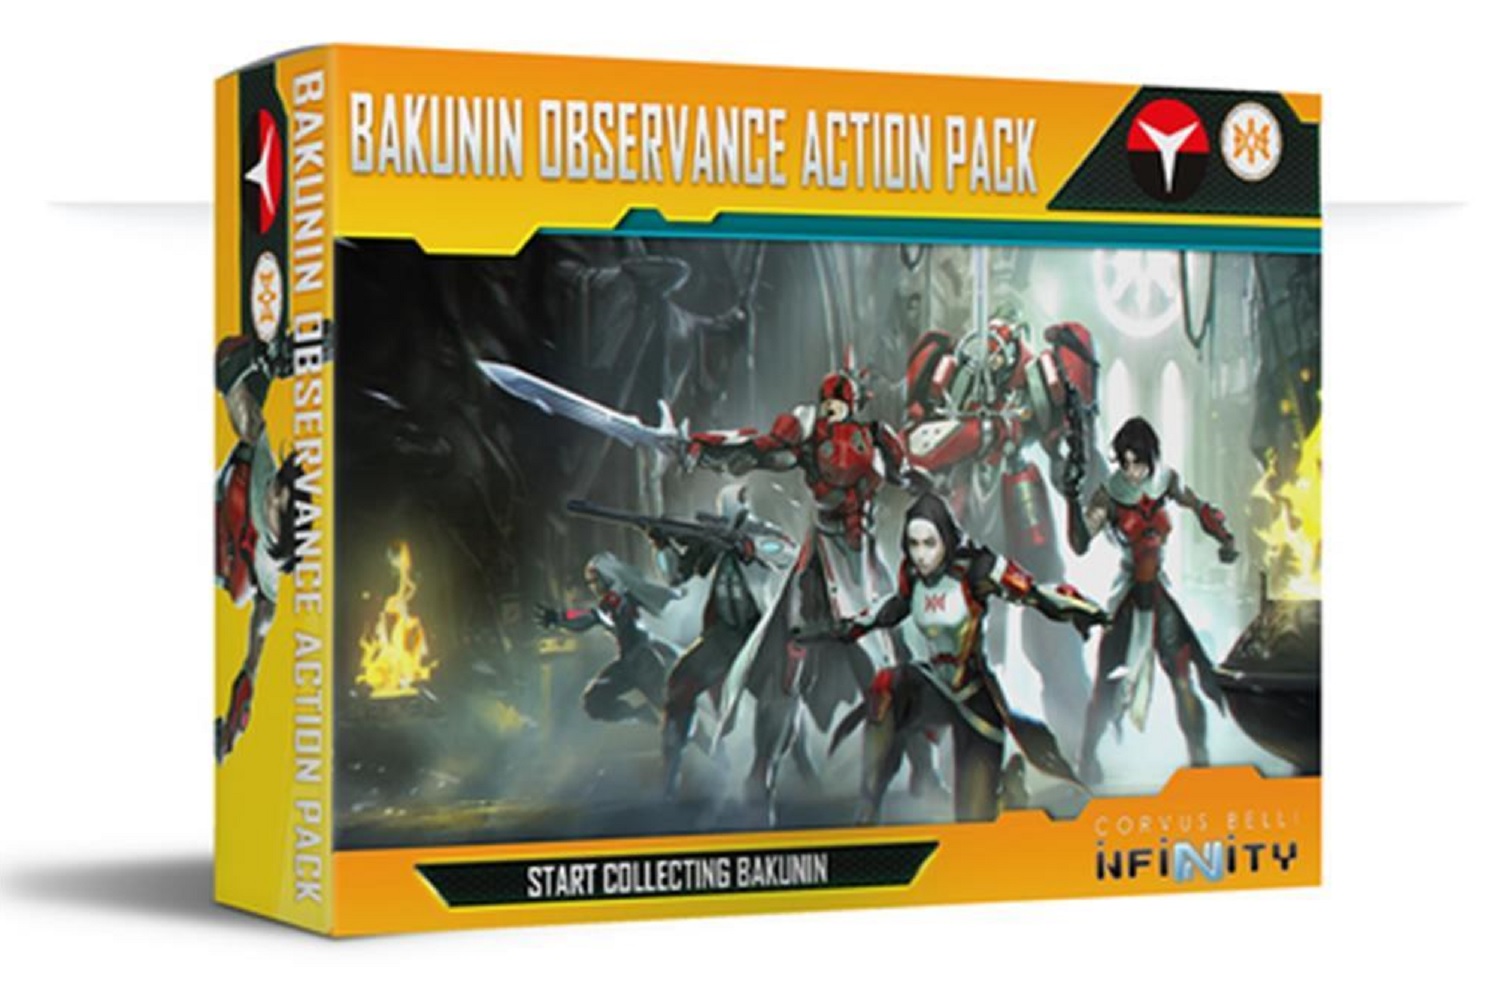 The Infinity Bakunin Observance Action Pack box.